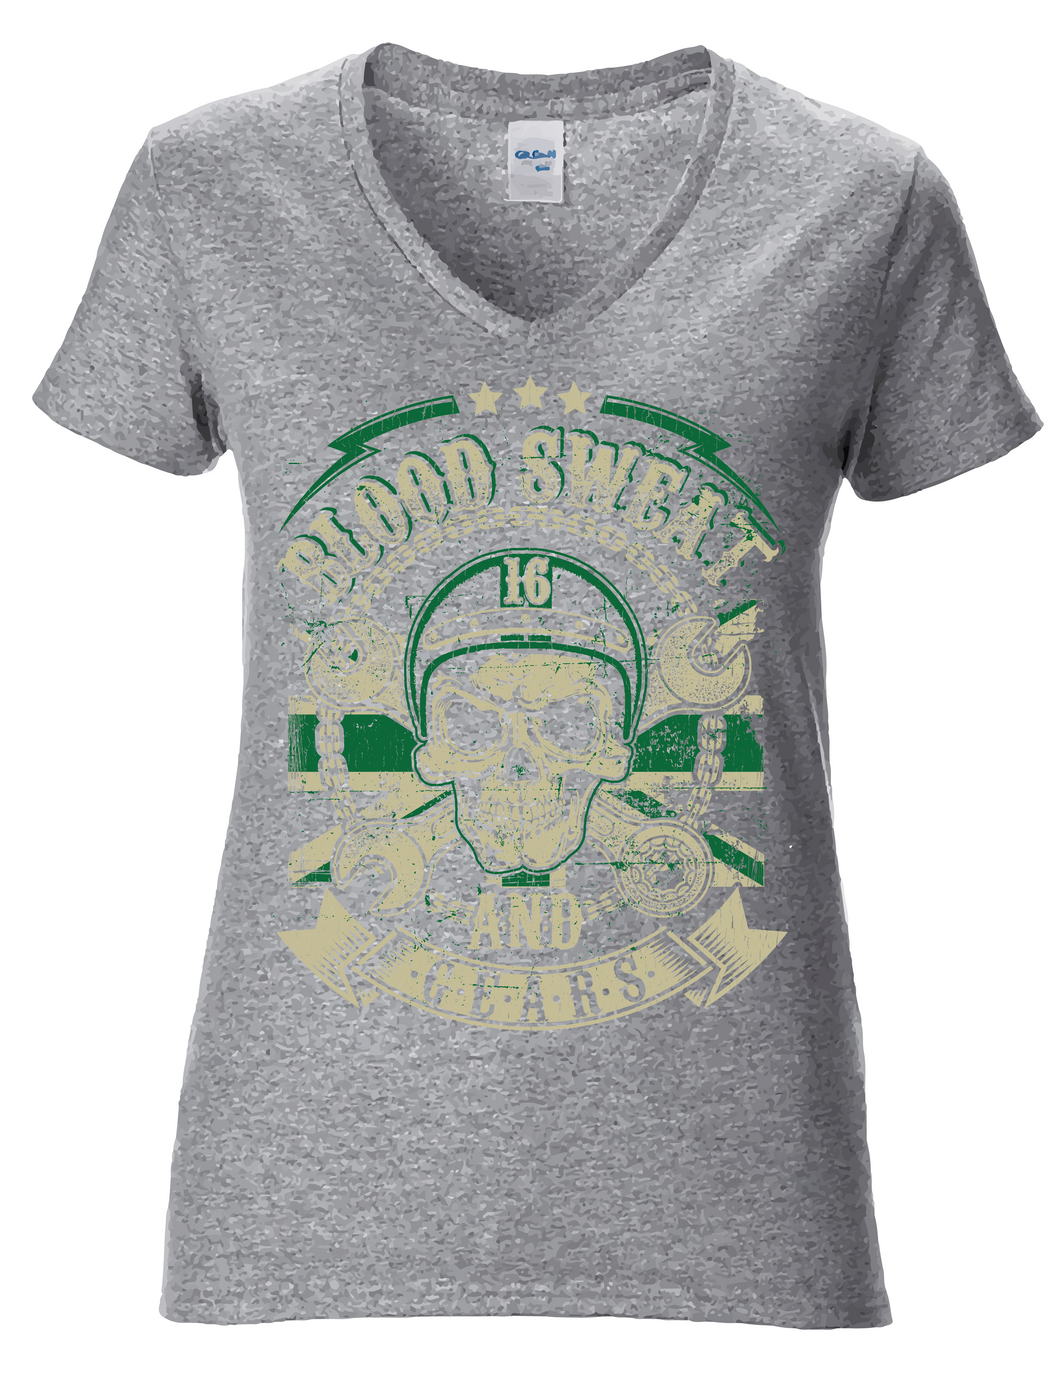 Ladies V-neck Grey Blood Sweat and Gears